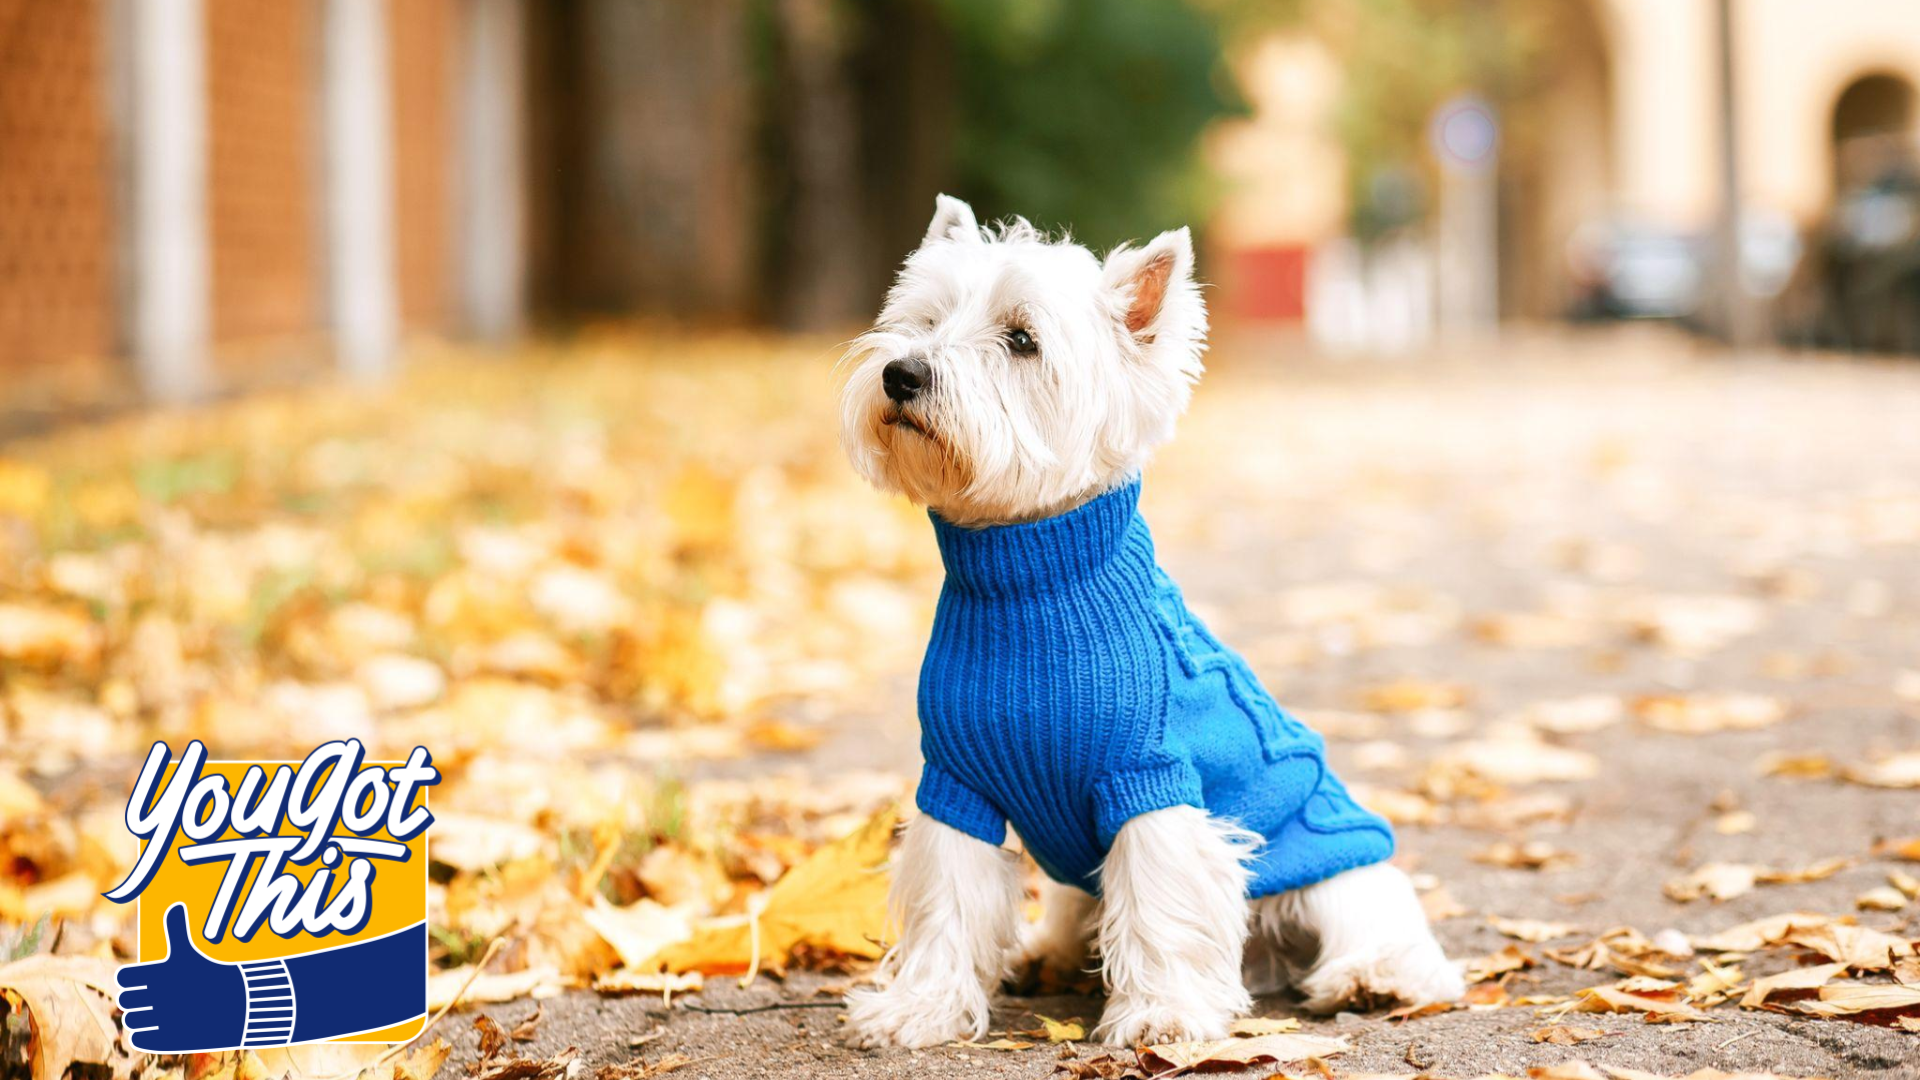 Small white dog wearing blue sweater on fall day